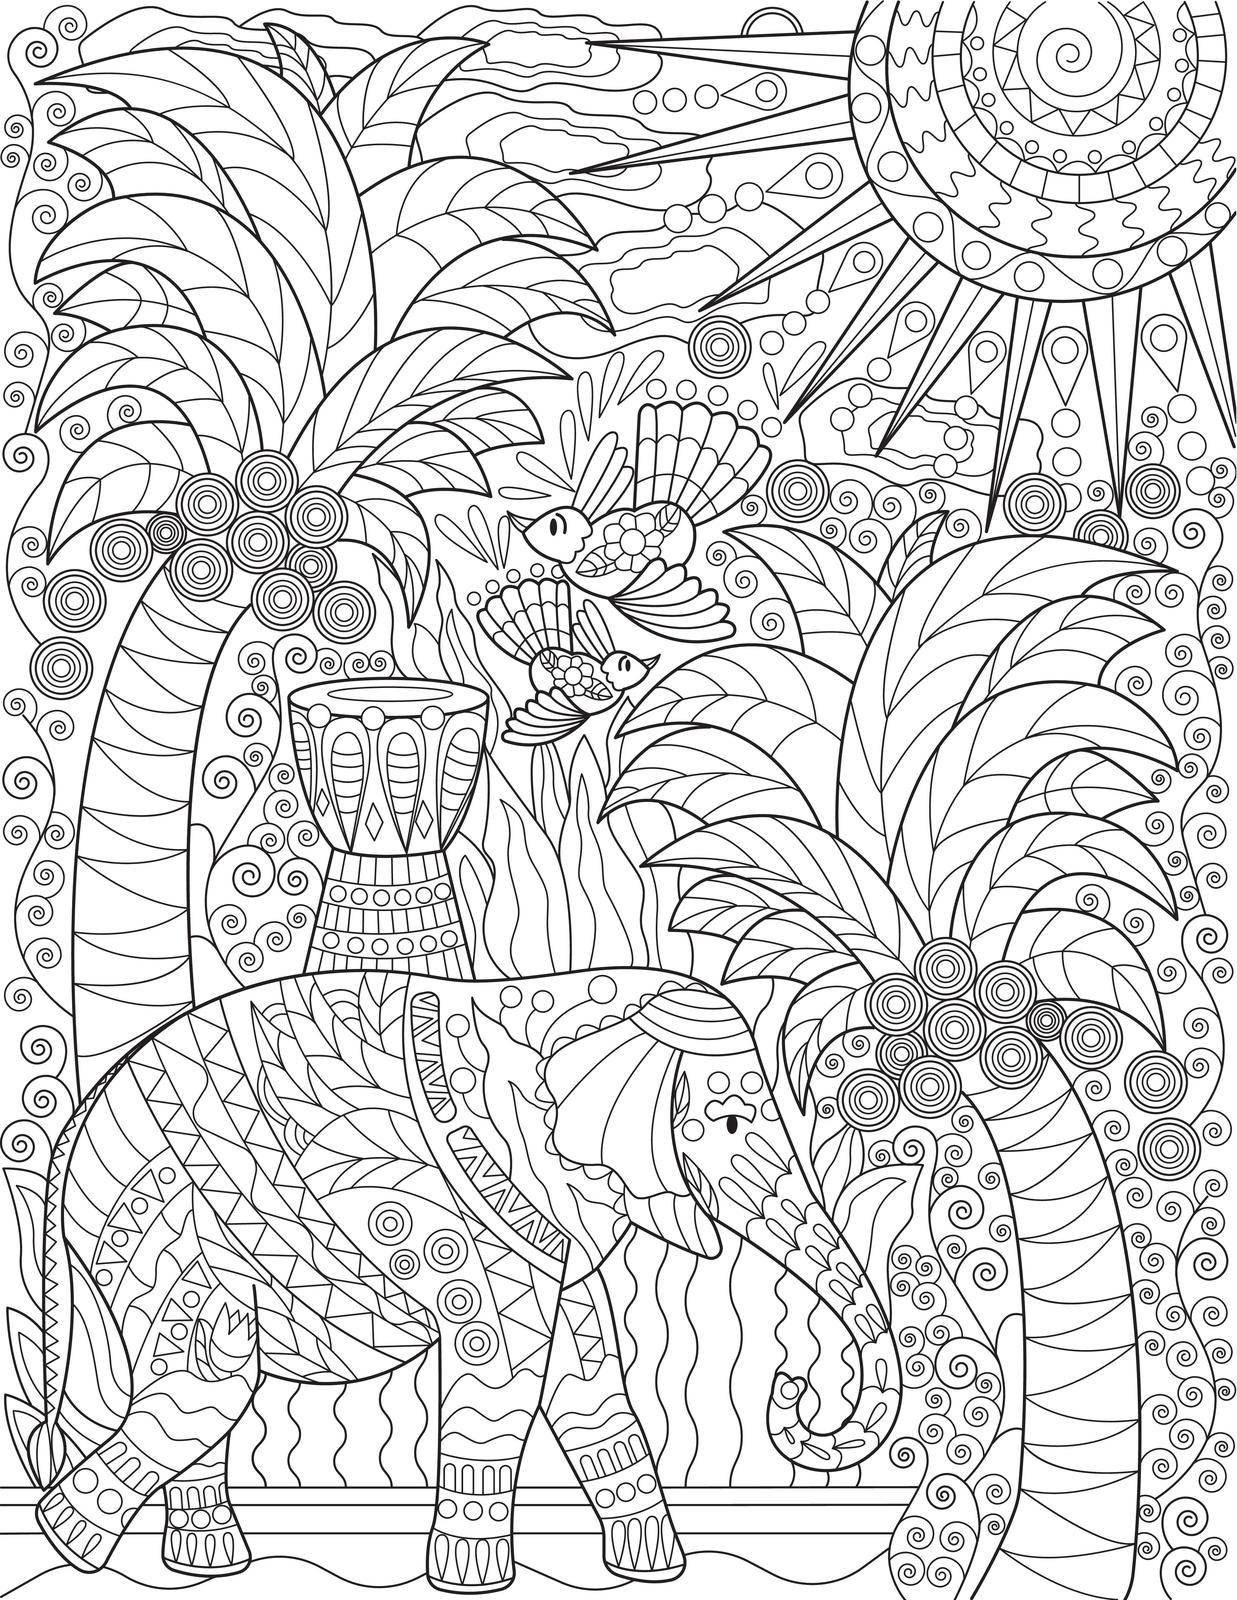 Large Elephant With Tall Coconut Trees Birds Flying Sun In The Sky Colorless Line Drawing. Big Mammal With Long Trunk Standing Walking Coloring Book Page by nialowwa